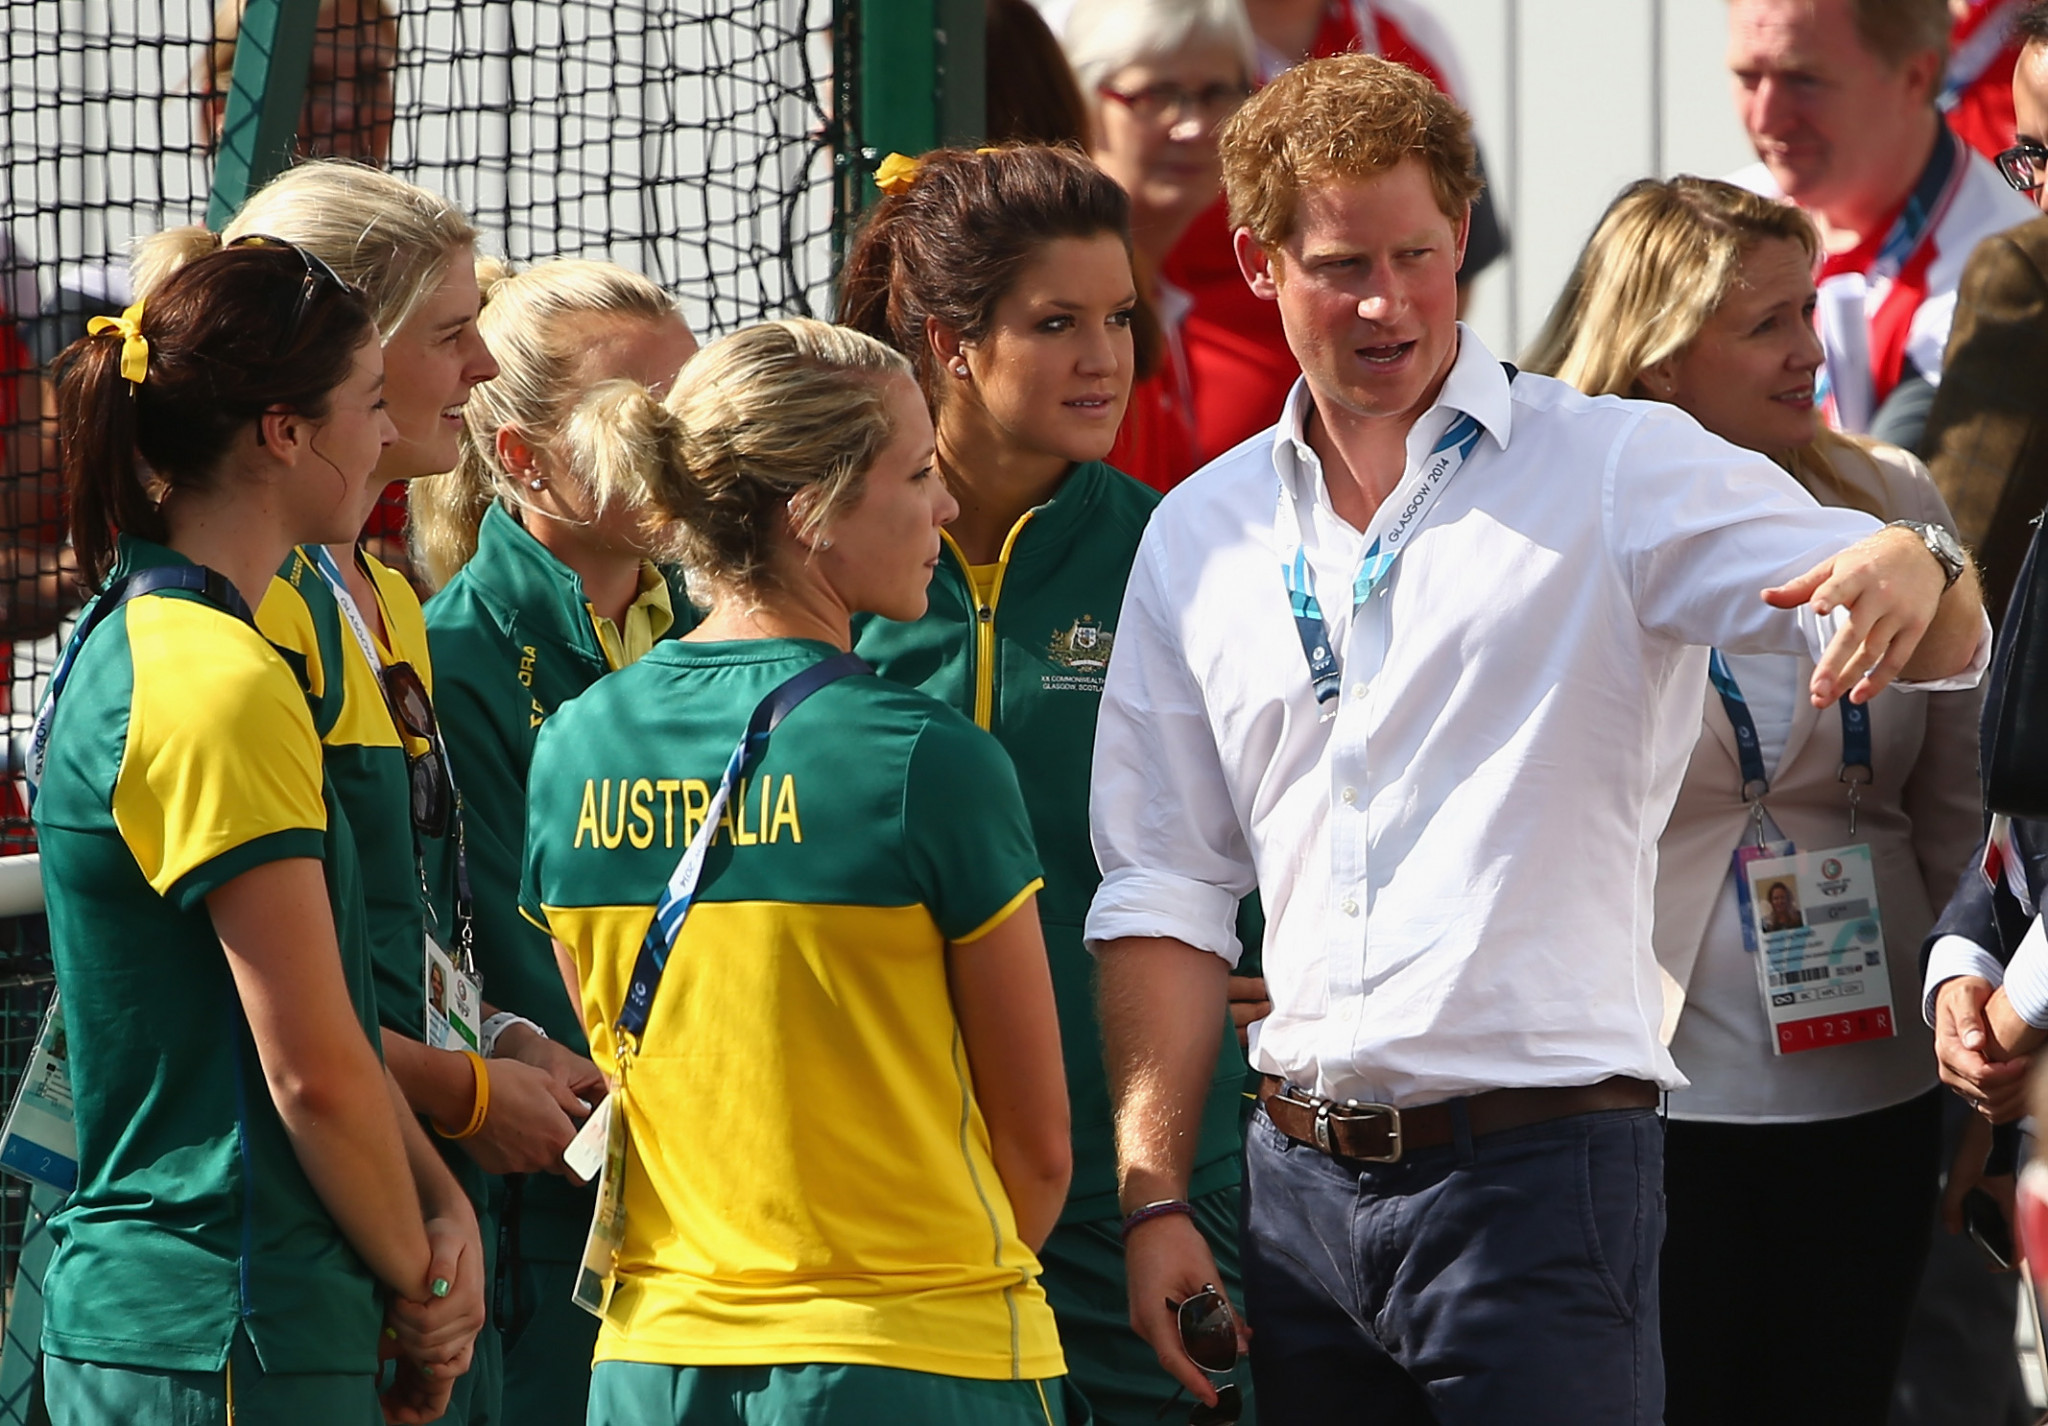 Prince Harry set to be given special role with Commonwealth Games